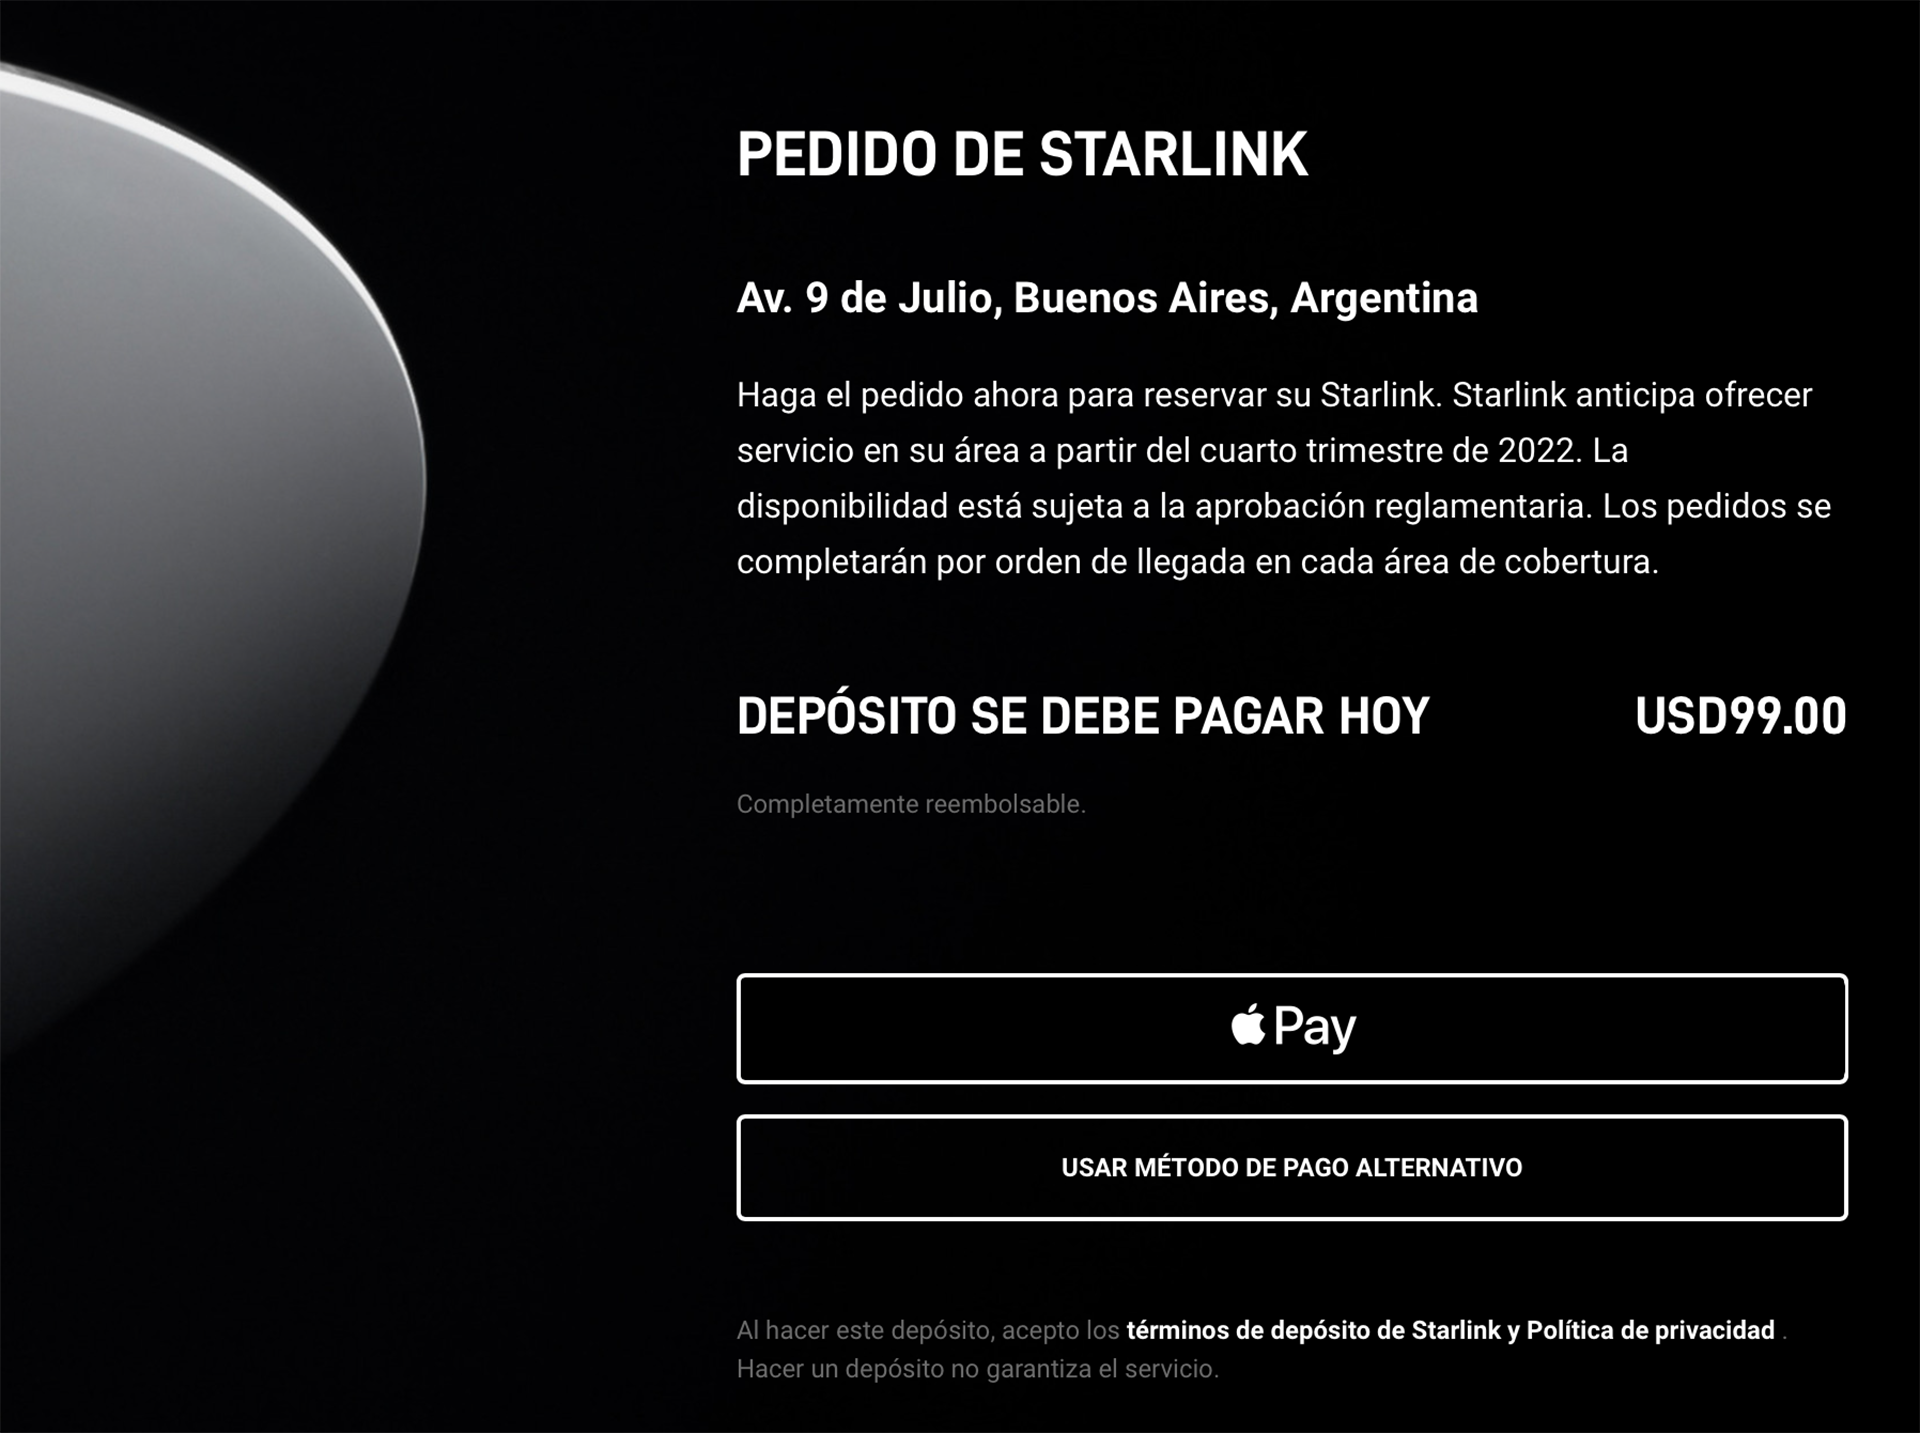 Elon Musk'S Company'S Official Website Announces Its Operations In Argentina For The Coming Months